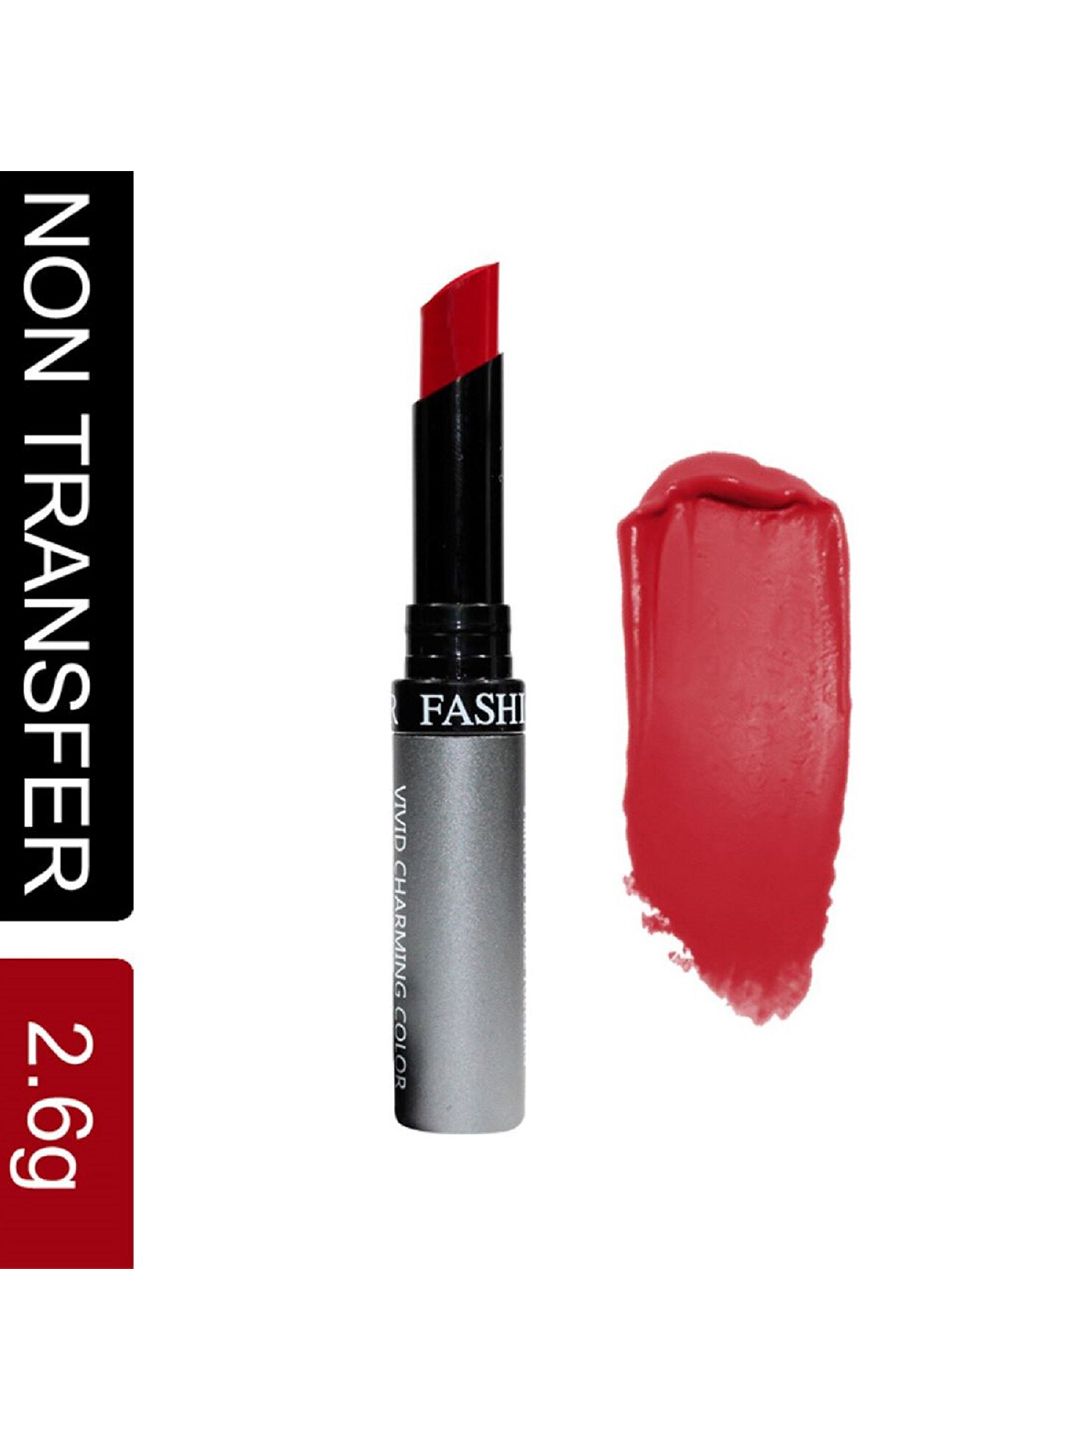 Fashion Colour Kiss Lip No-Transfer Waterproof Lipstick 2.6 g - Date Red 66 Price in India